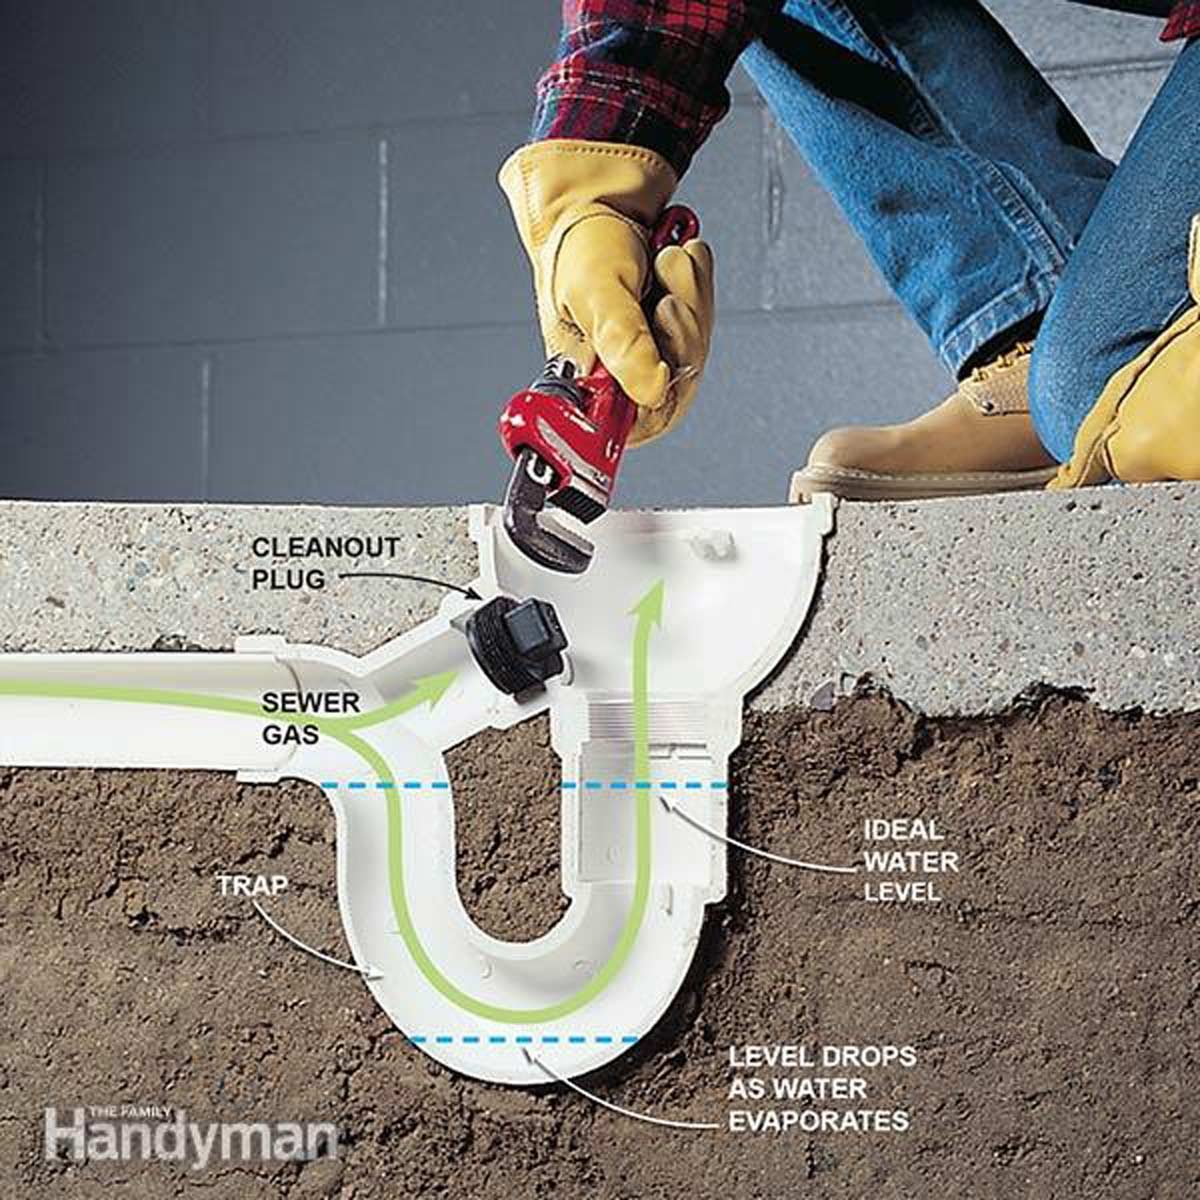 How To Eliminate Basement Odor And Sewer Smells Family Handyman [ 1200 x 1200 Pixel ]